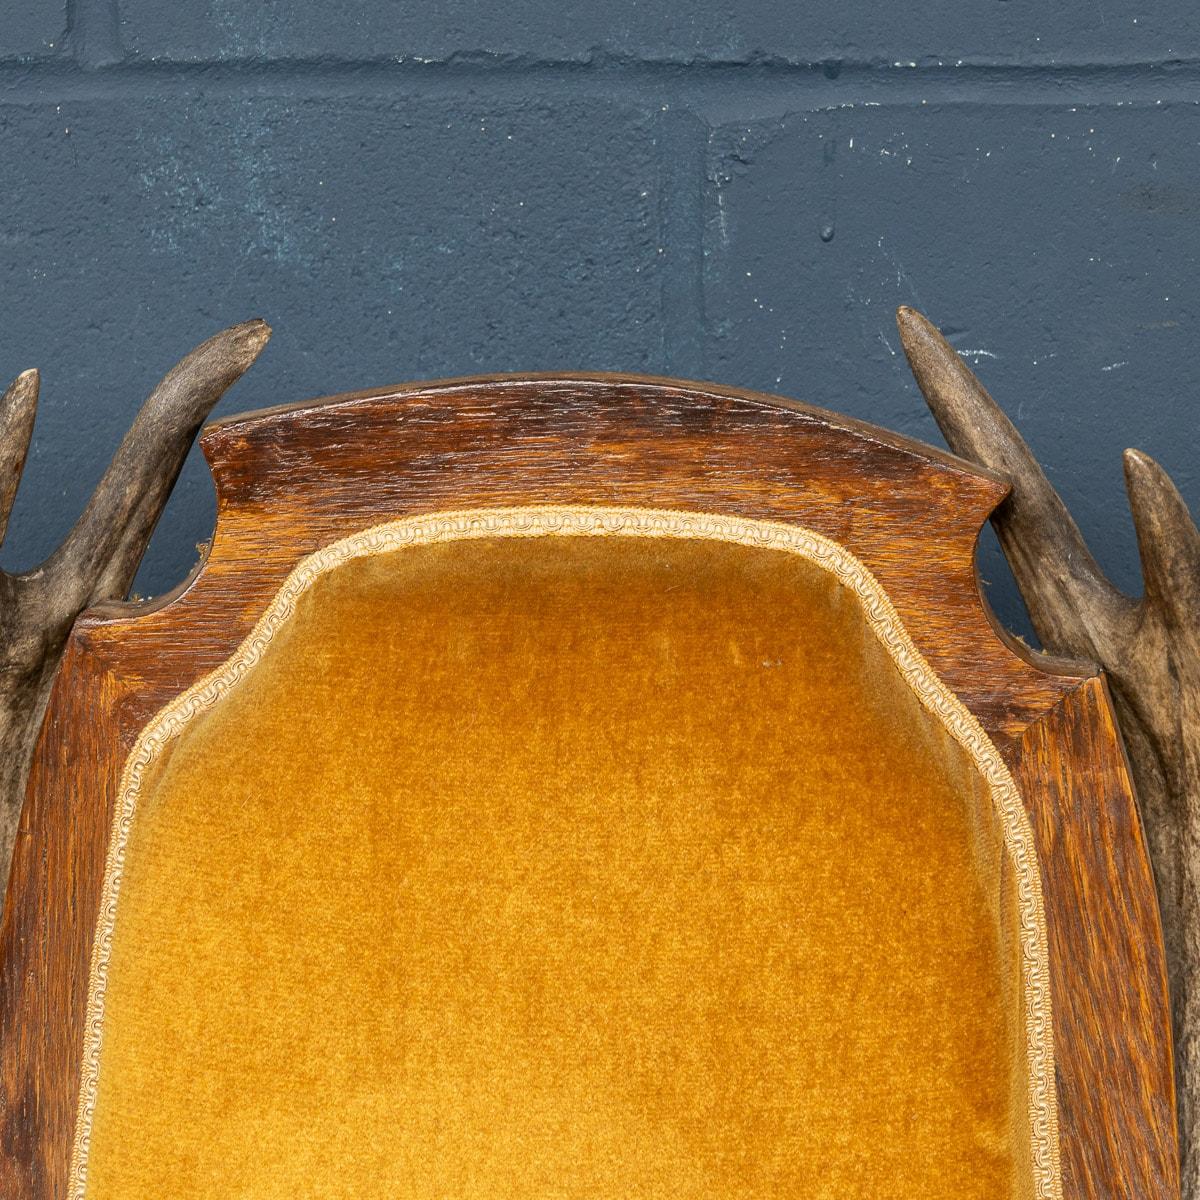 19th Century Swiss-German Black Forest Antler Horn Throne Chair For Sale 11